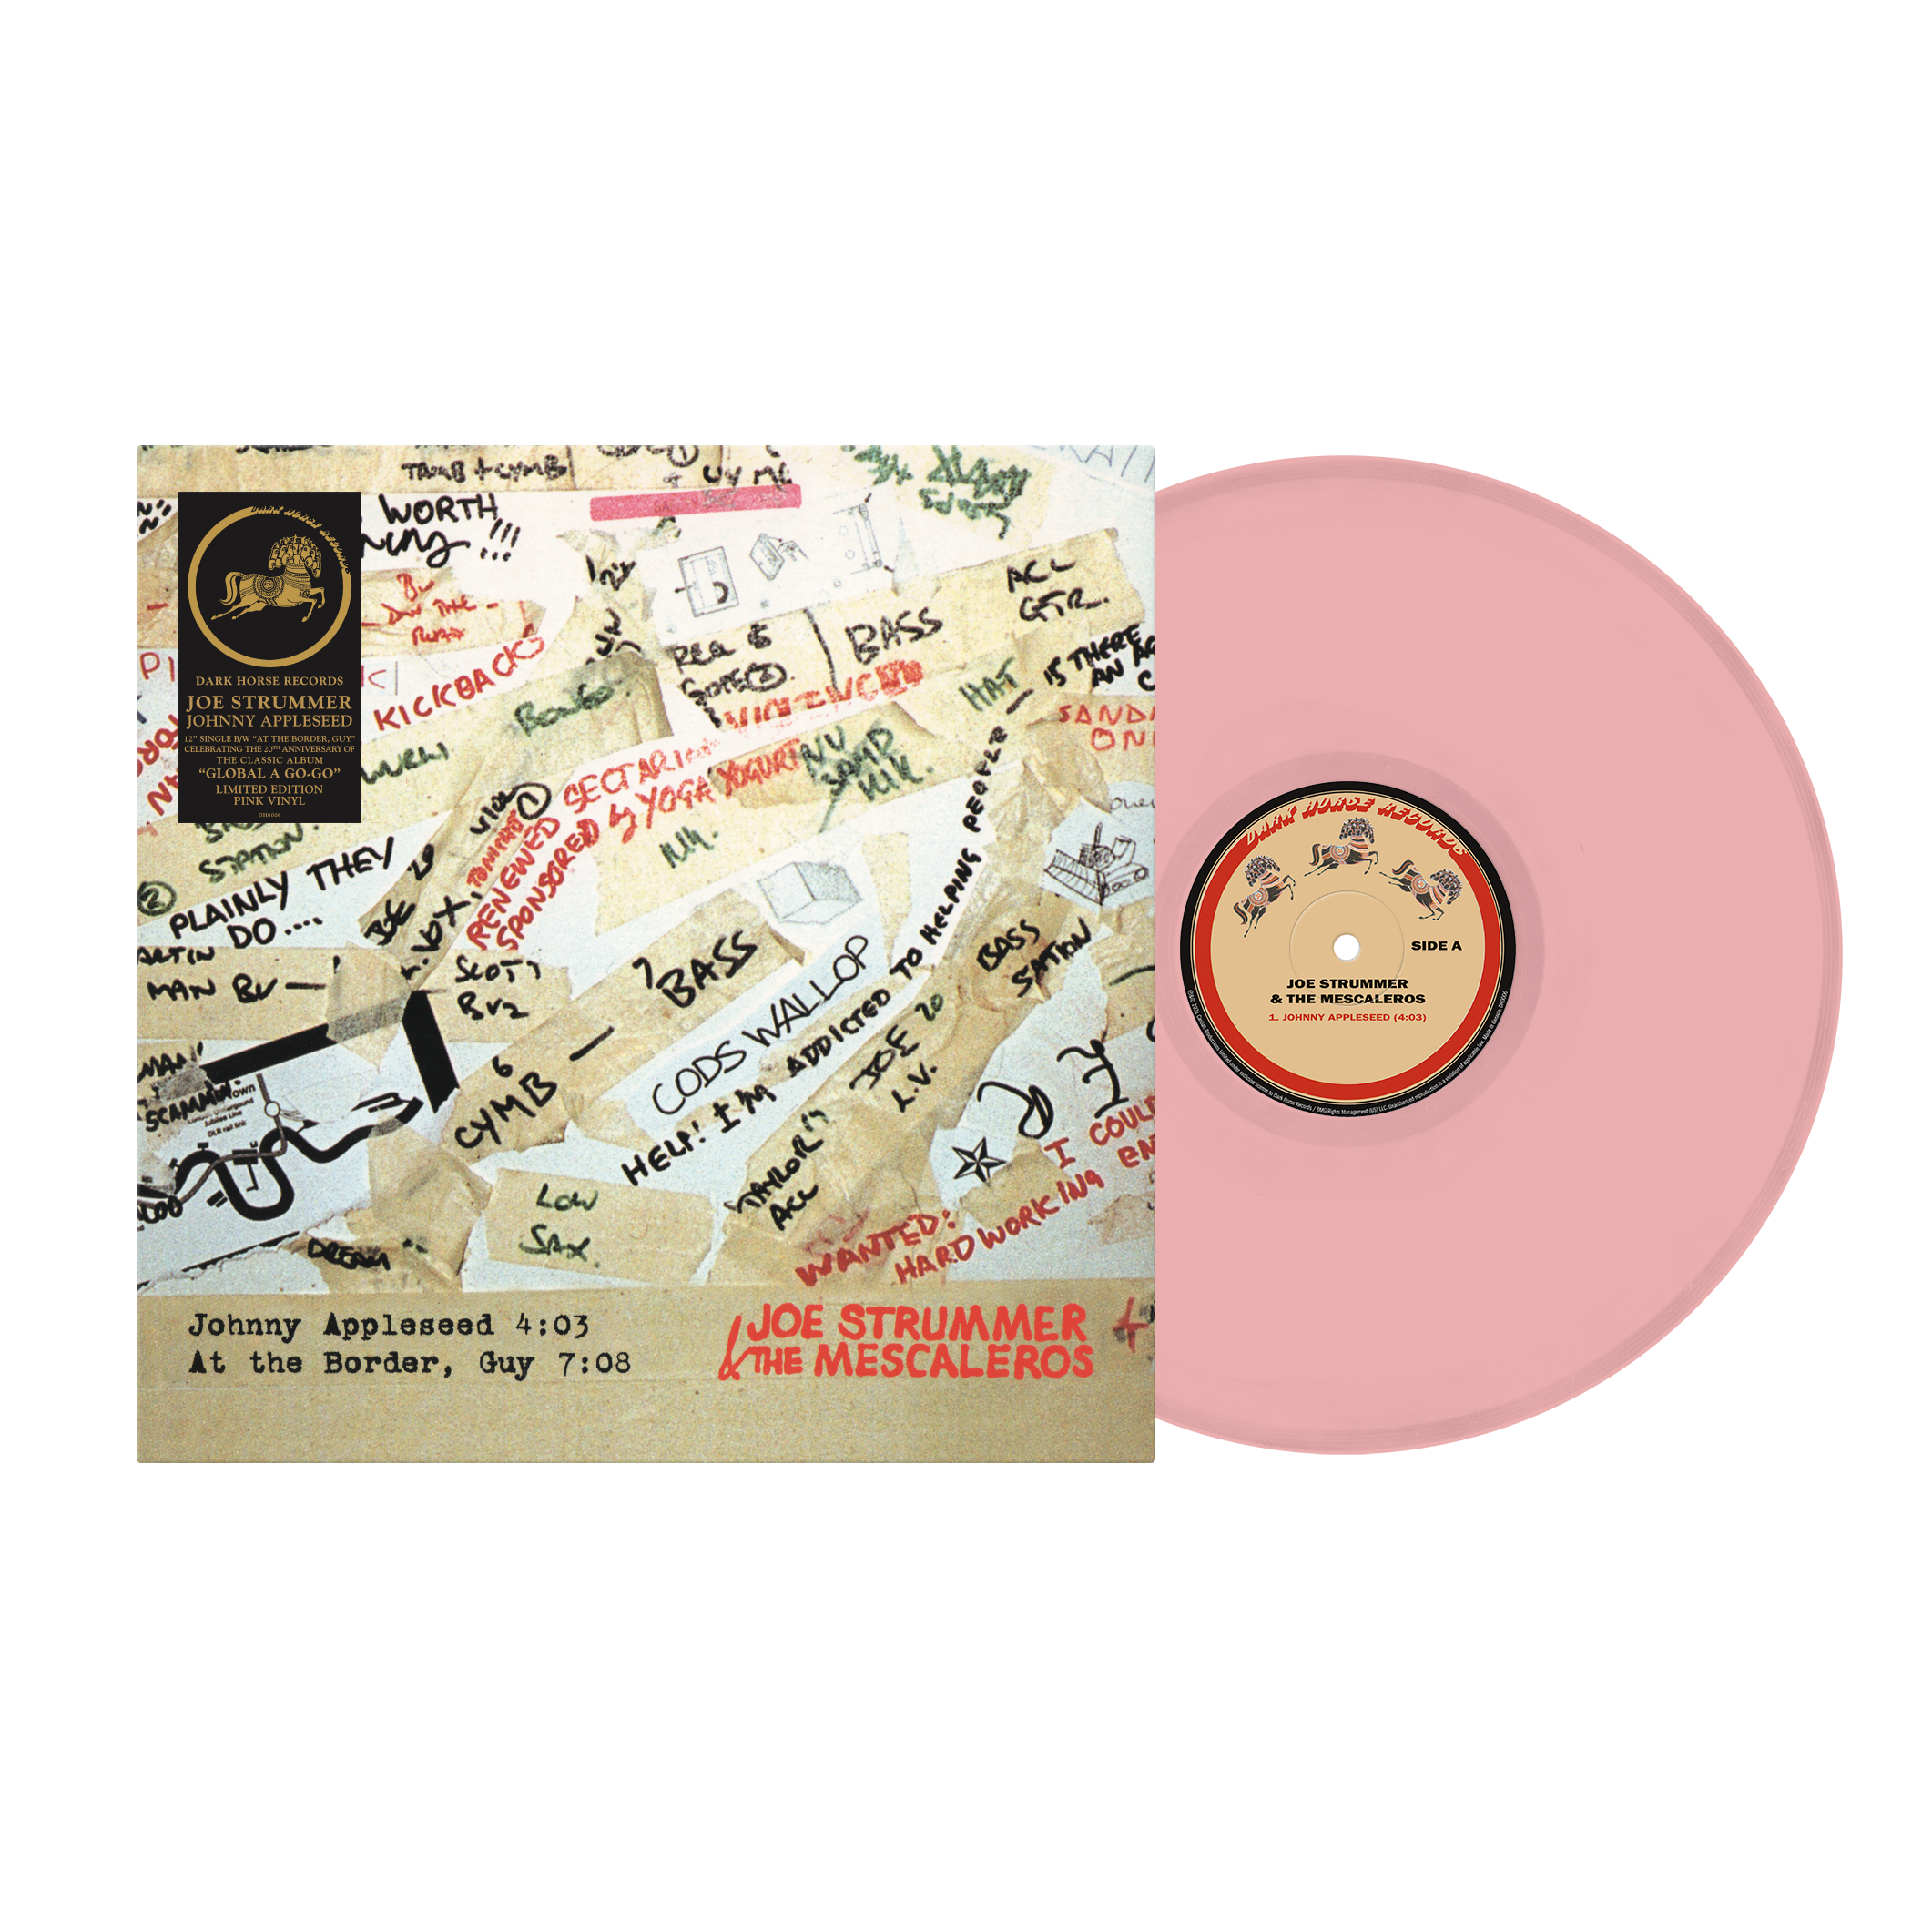 Limited Edition - Johnny Appleseed - Pink Vinyl 12